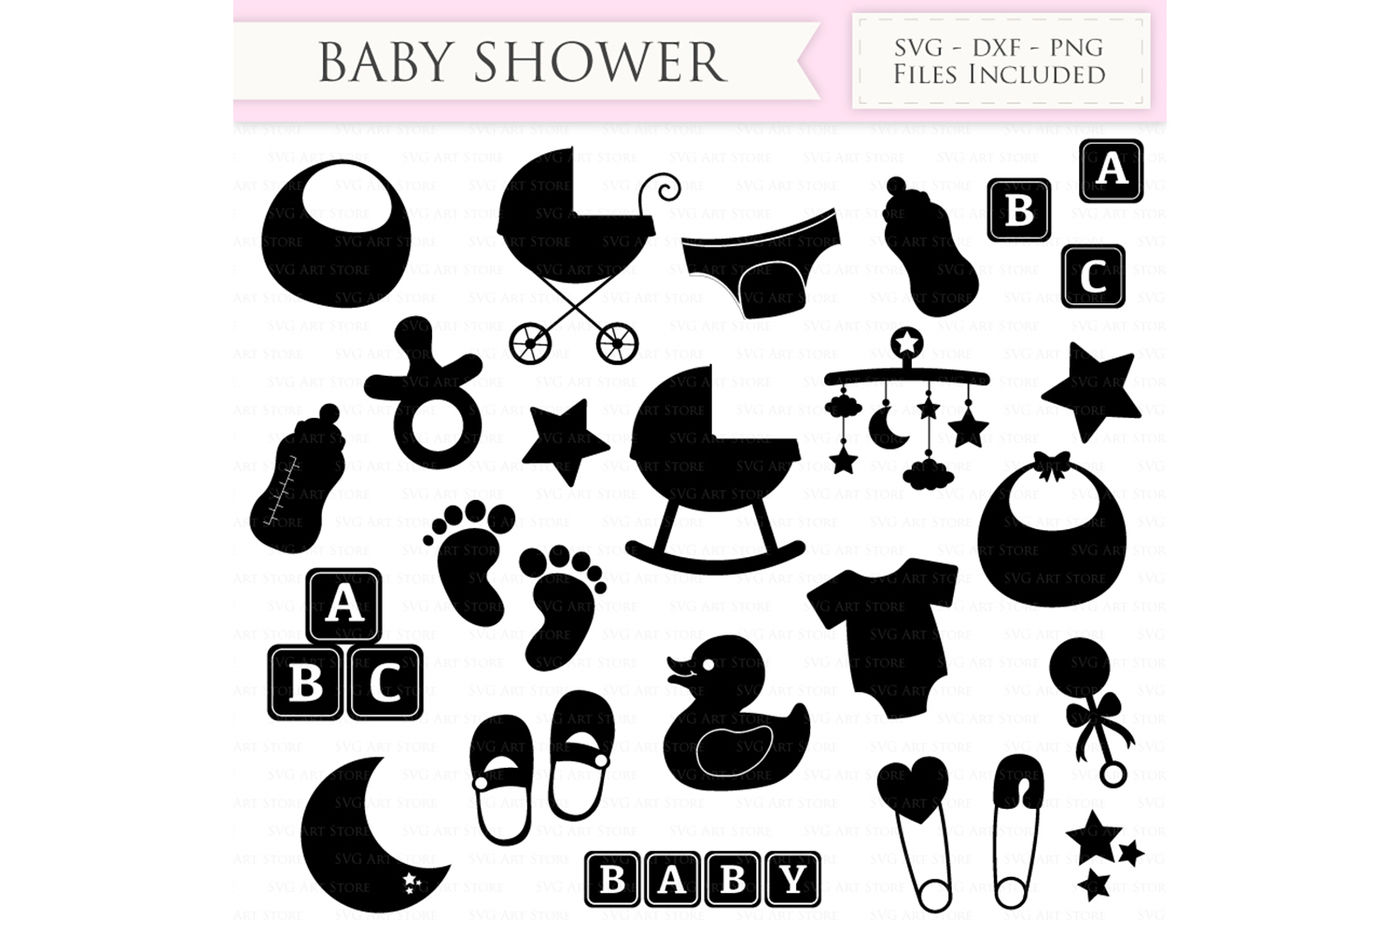 Download Baby Shower SVG Files - New baby SVG Cutting File By ...